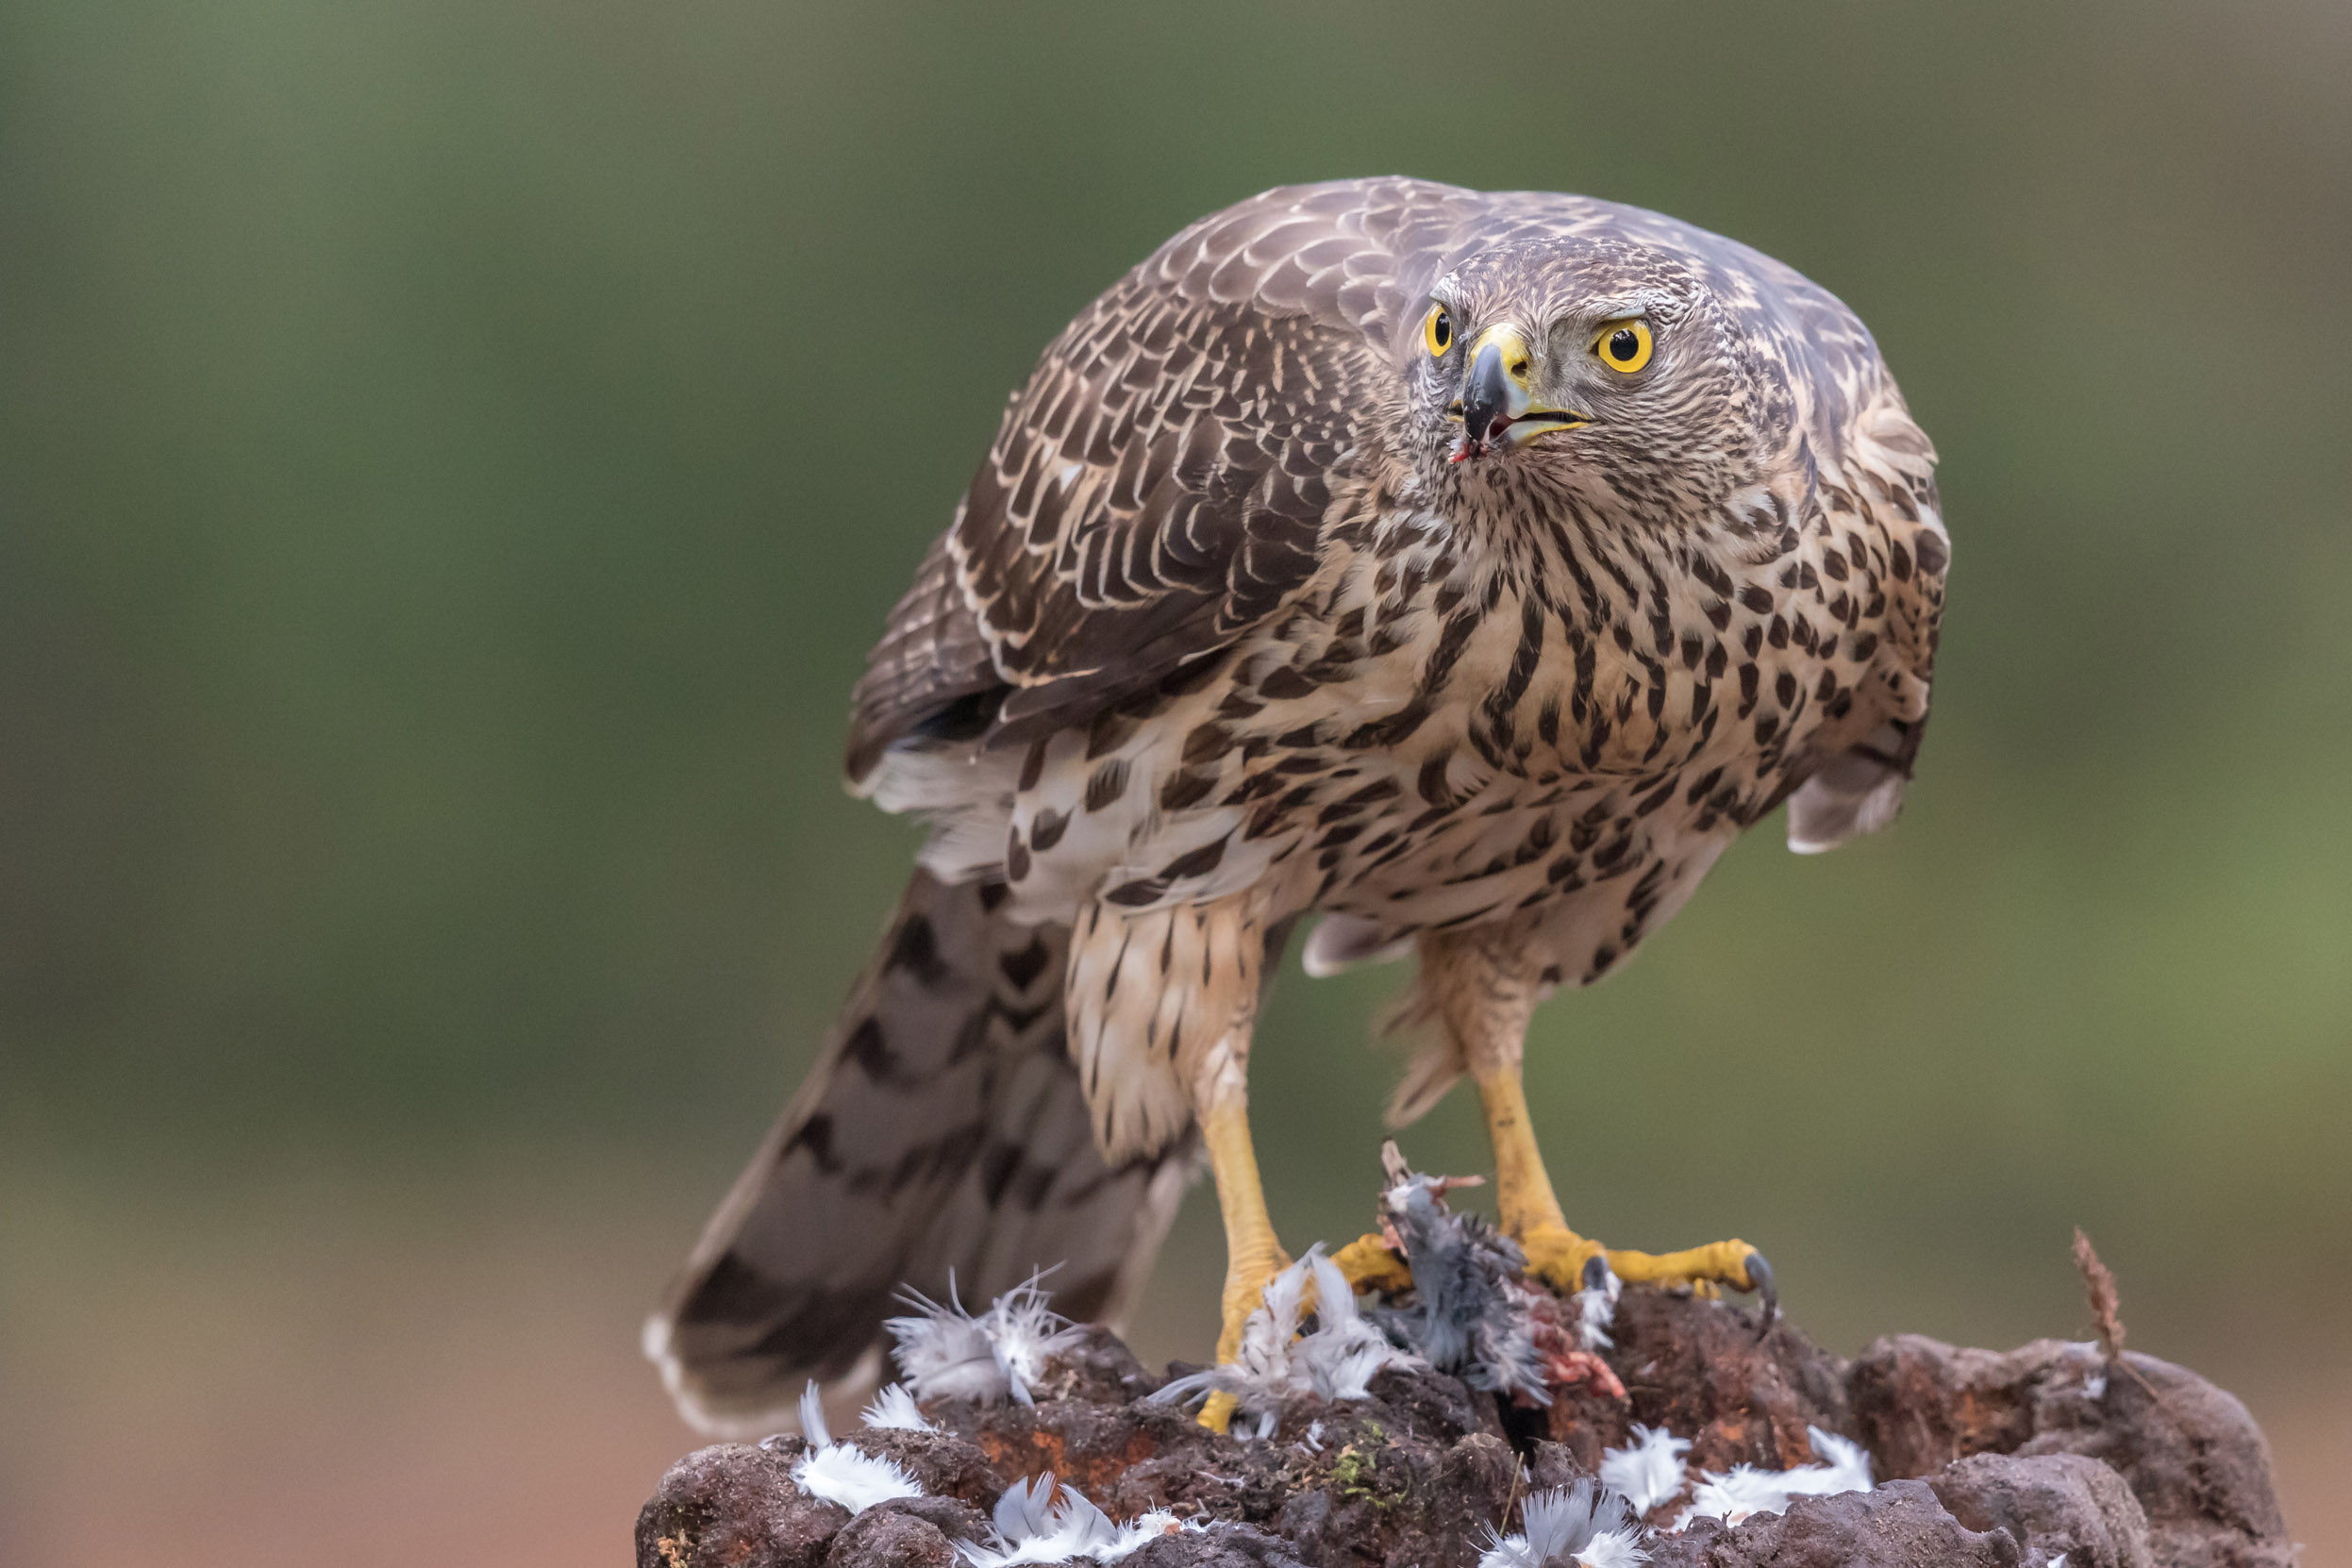 A lone juvenile Goshawk perched on a tree trunk with prey at its feet.